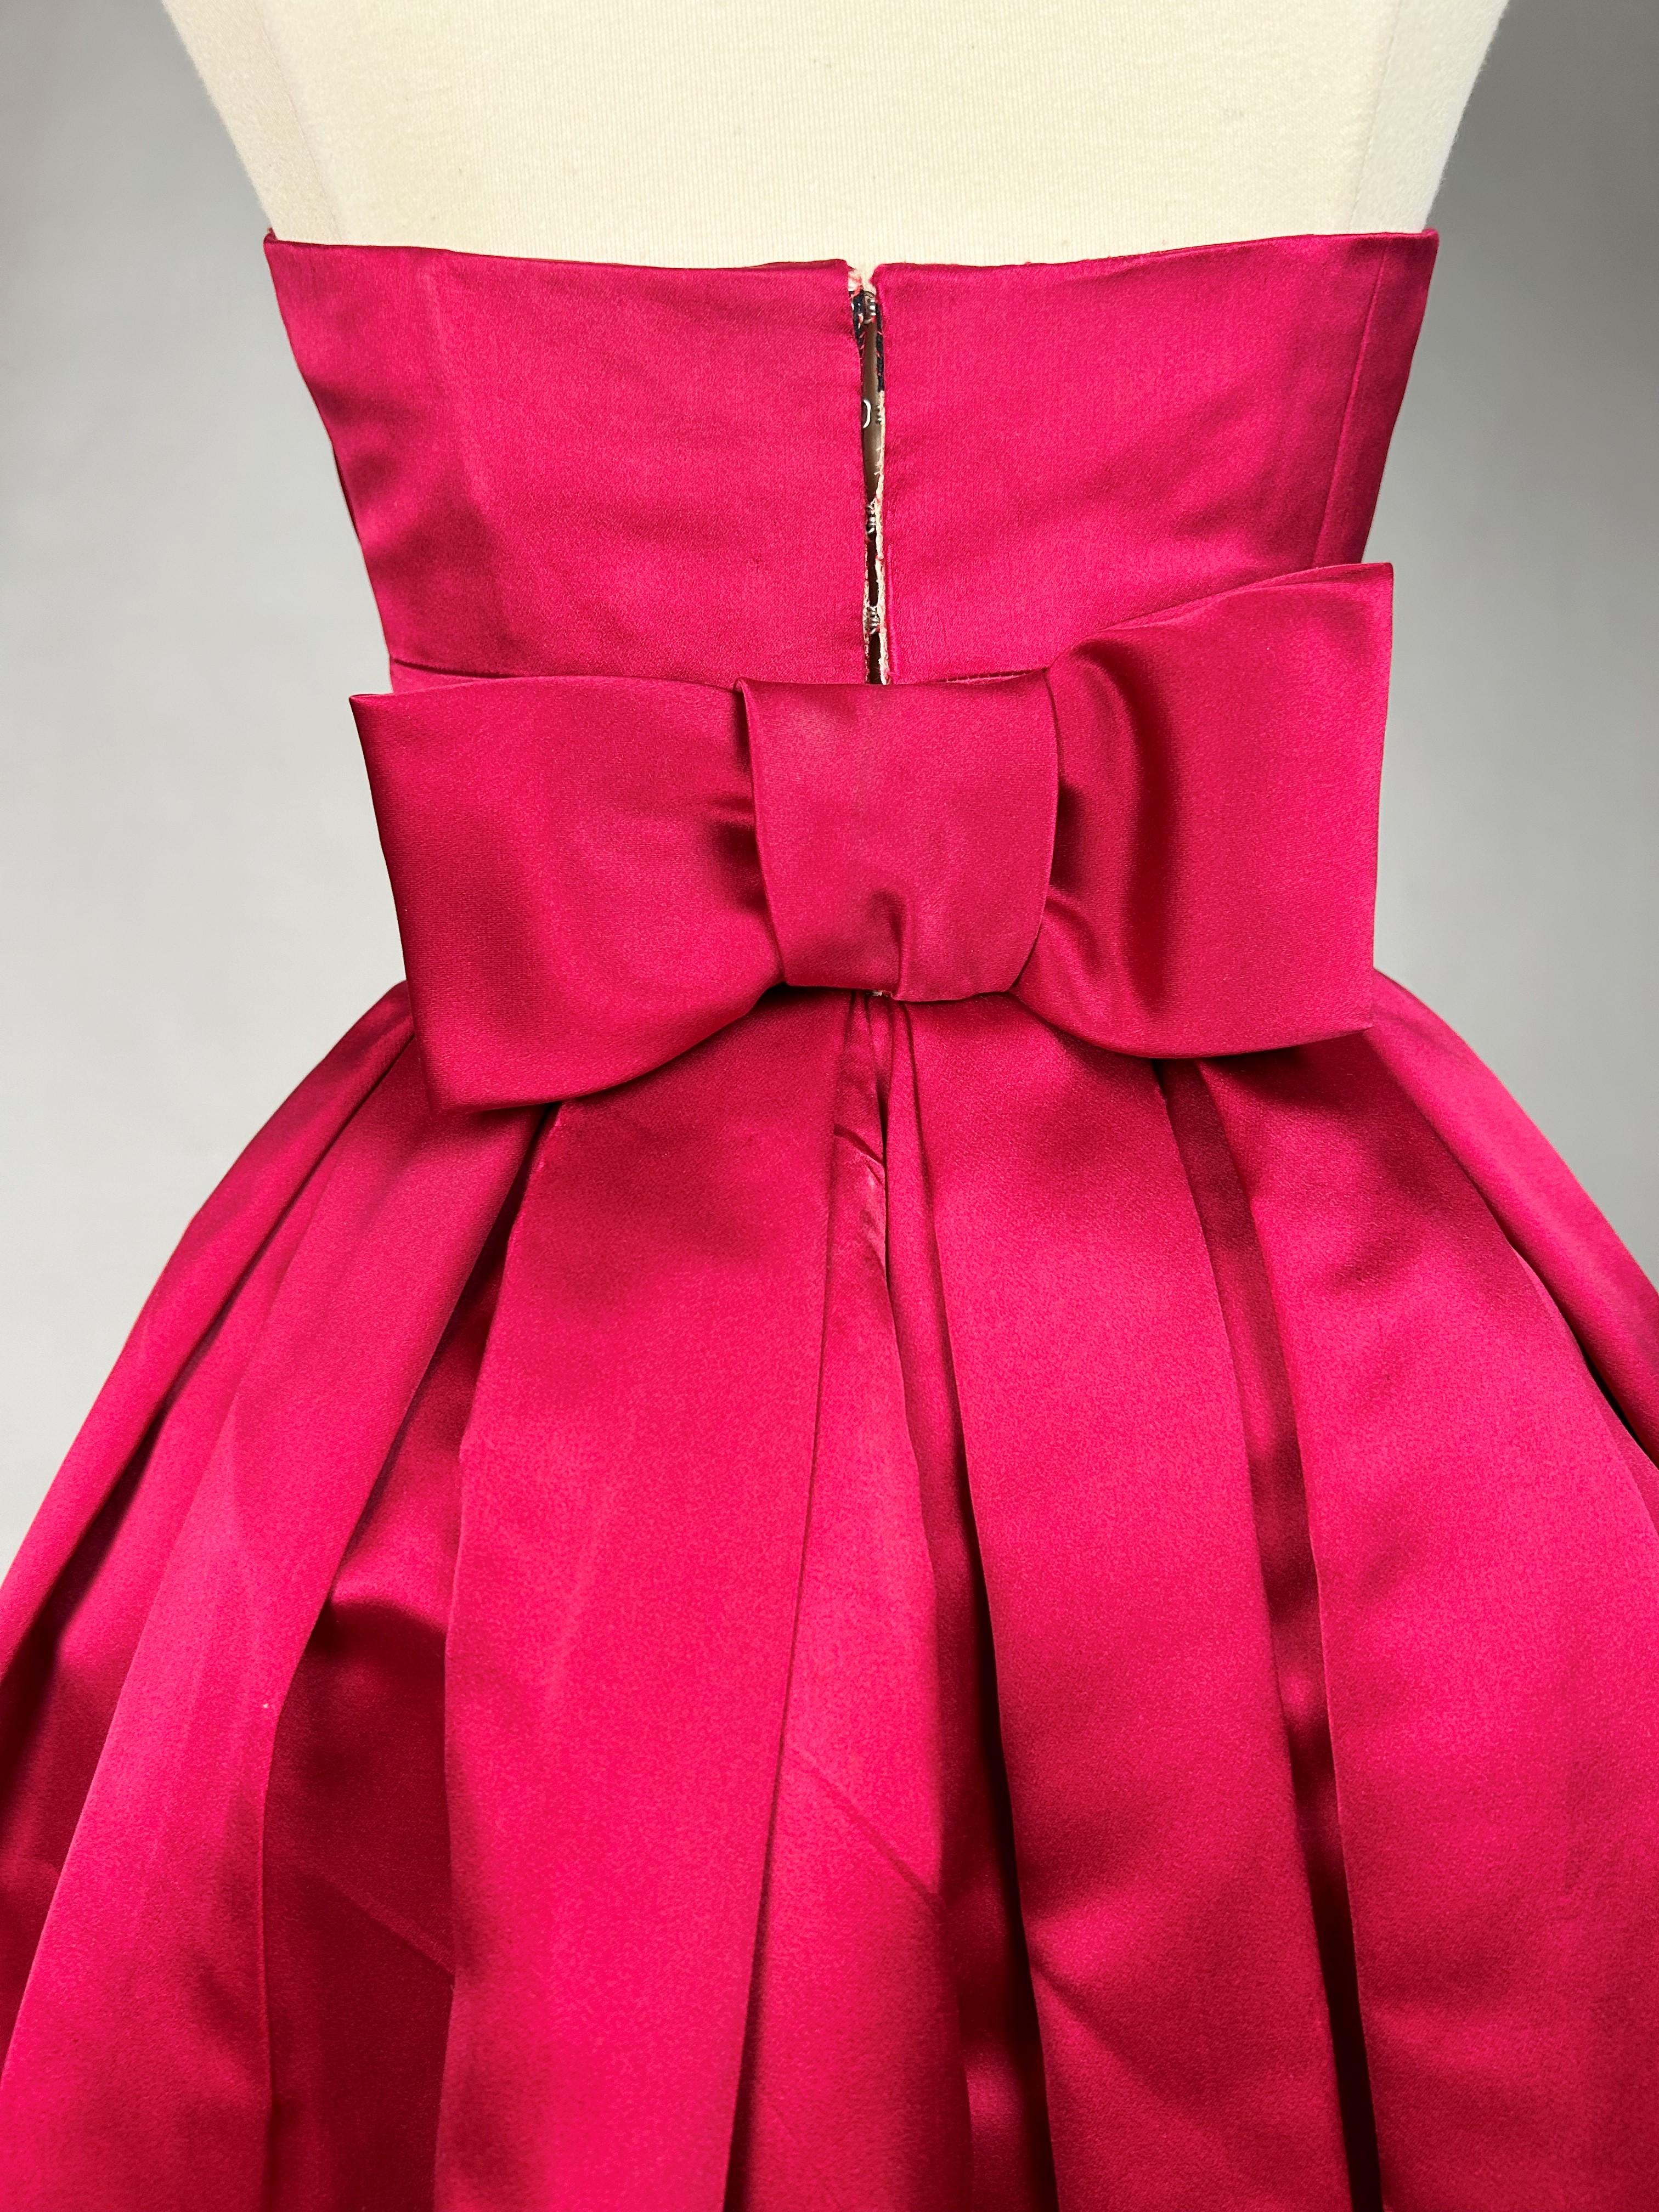 Cocktail dress in raspberry satin in the style of Christian Dior - Paris C. 1955 8